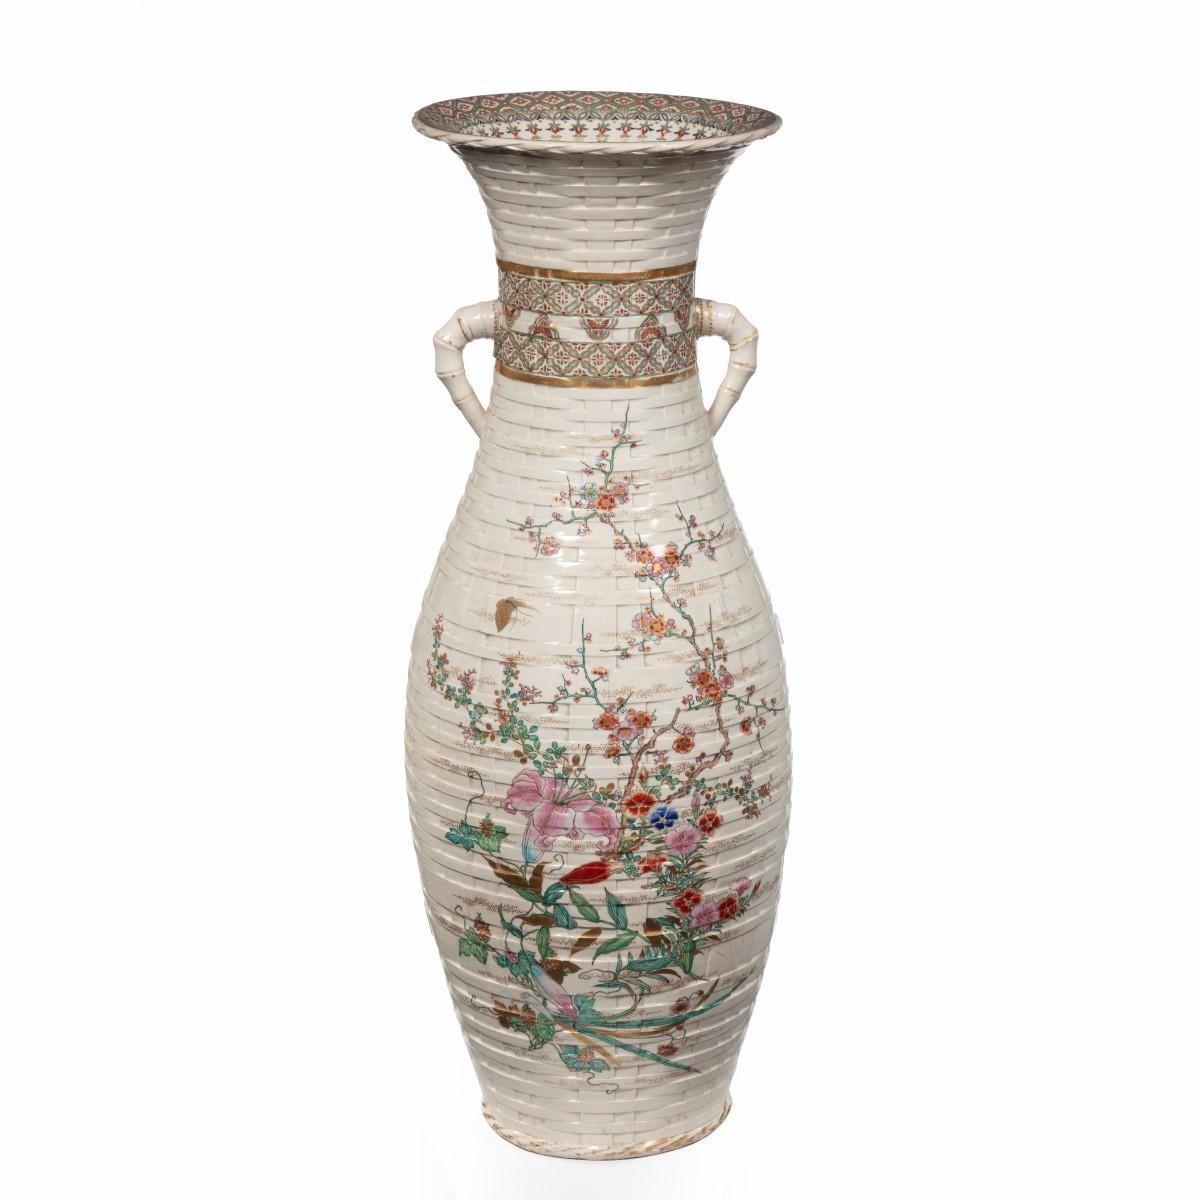 Large Meiji Period Satsuma Earthenware Floor Vase In Good Condition For Sale In Lymington, Hampshire